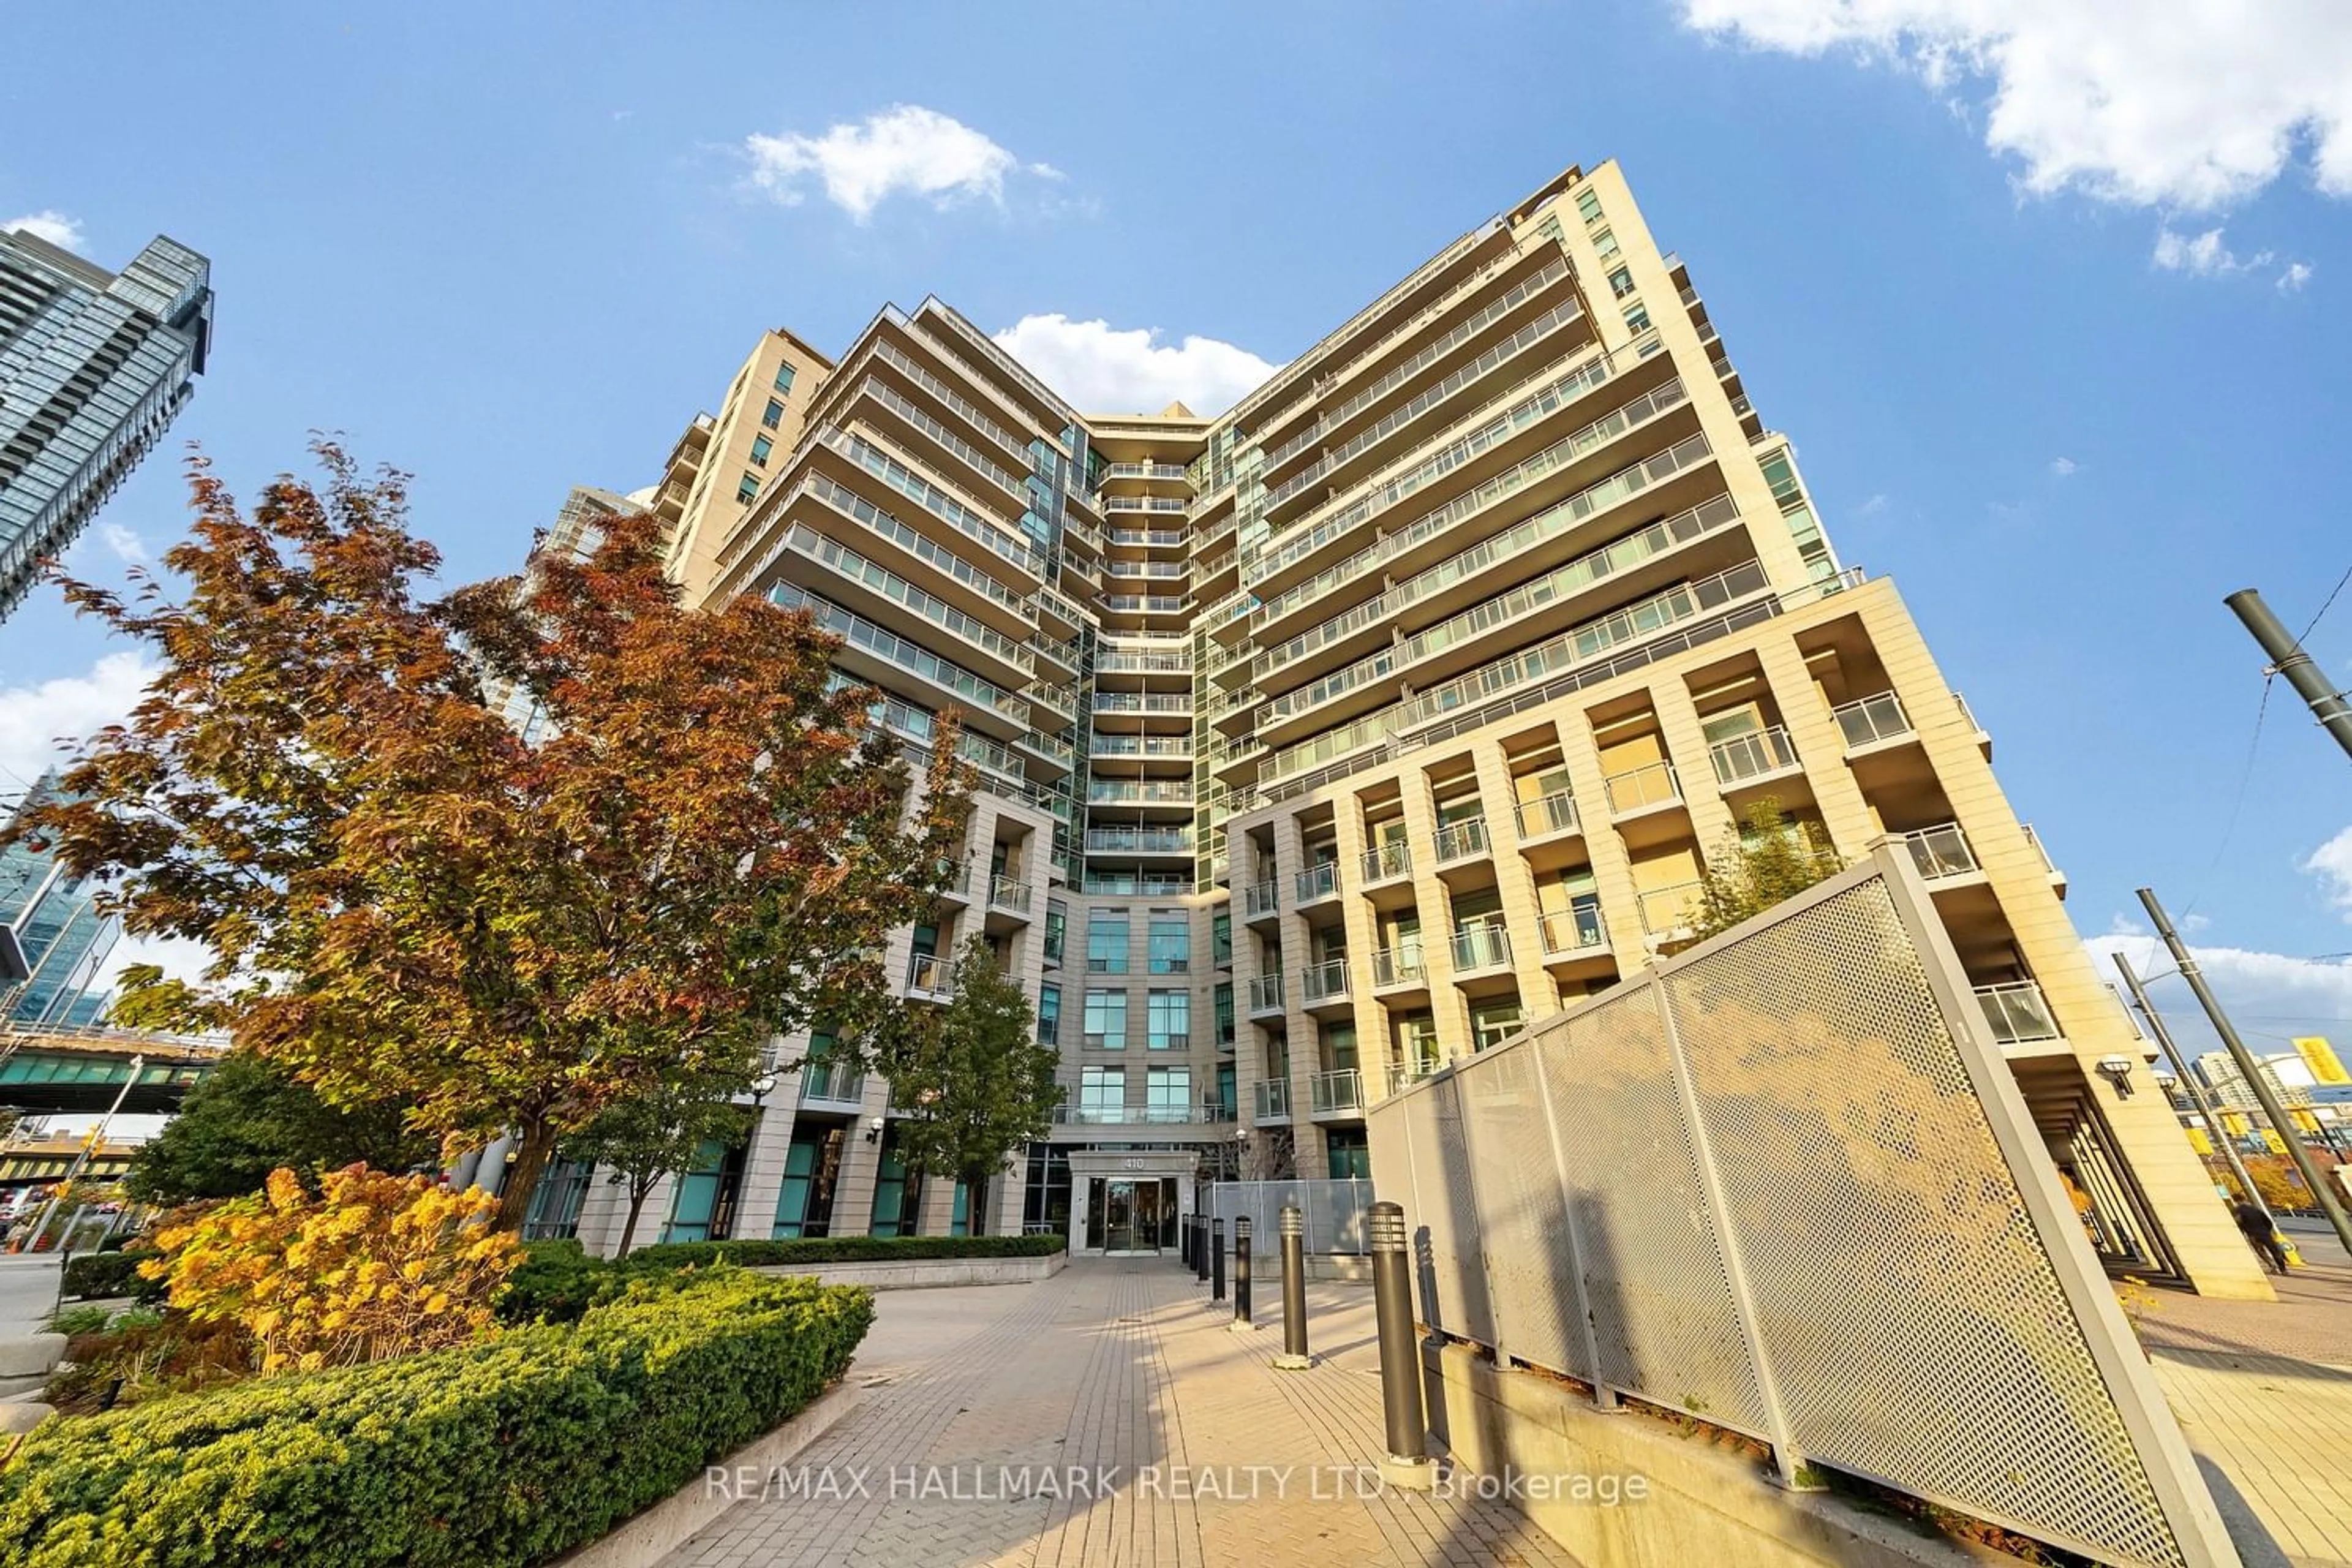 A pic from exterior of the house or condo for 410 Queens Quay #505, Toronto Ontario M5V 3T1